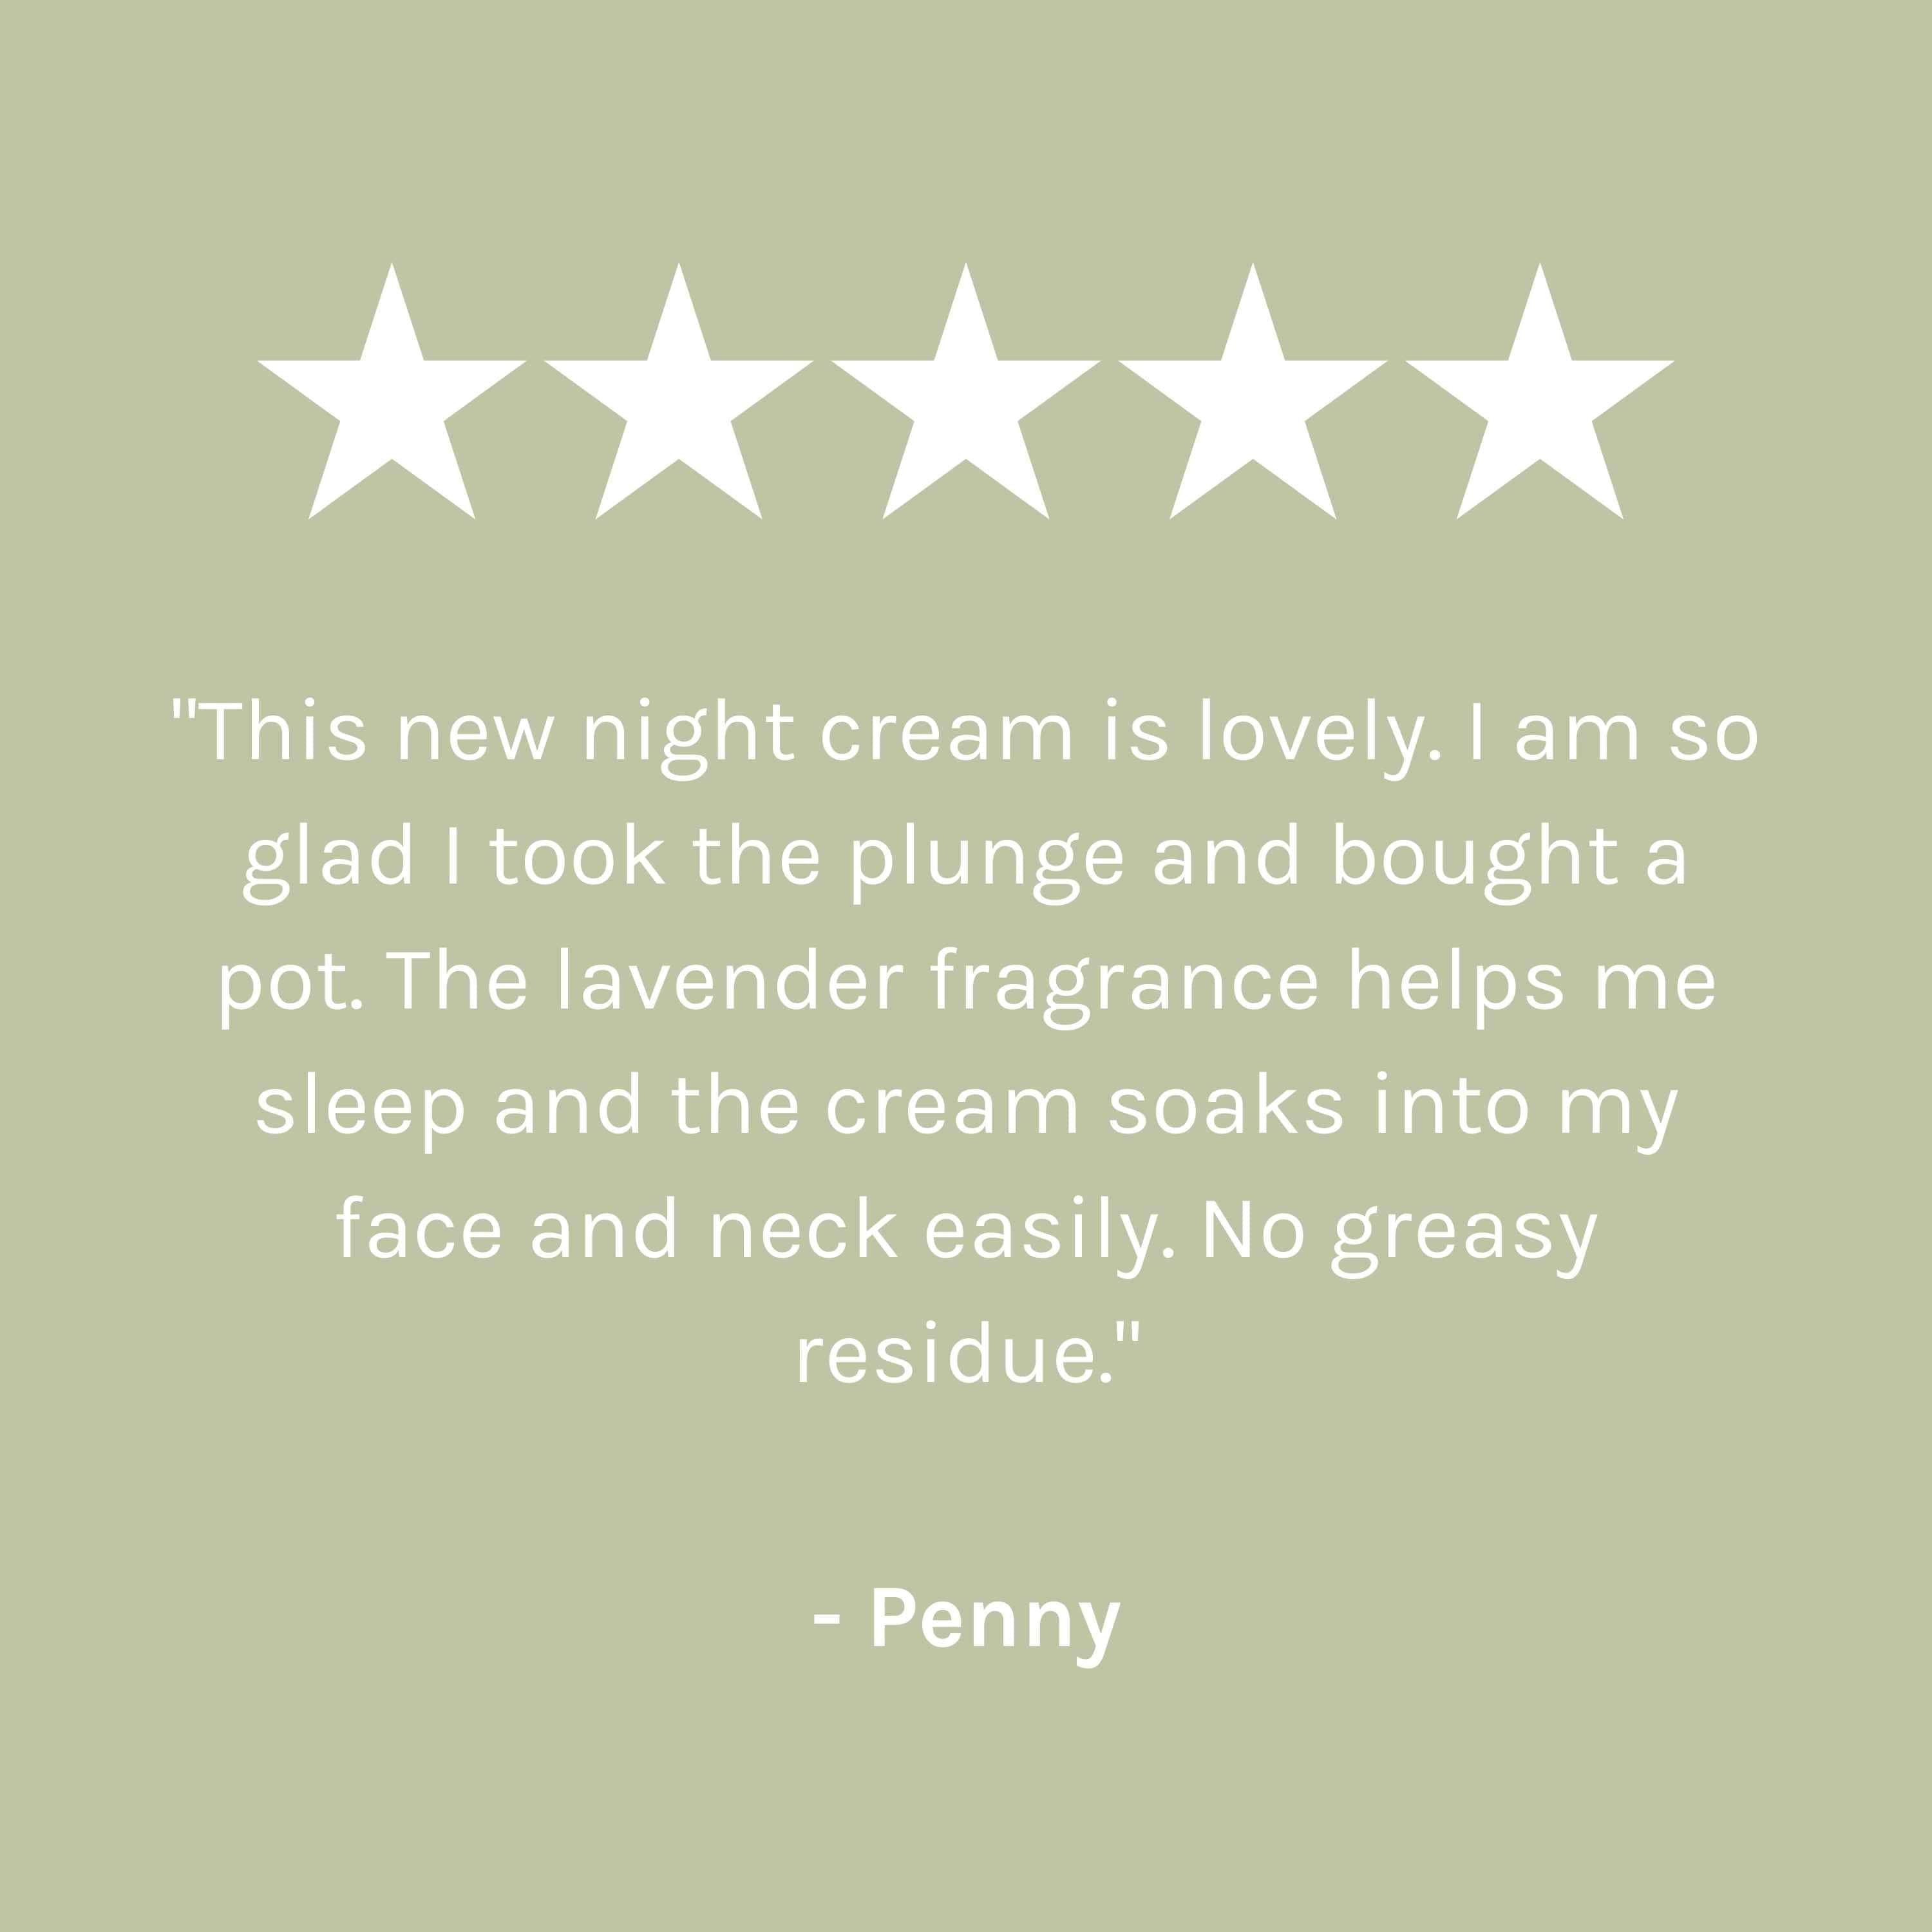 &quot;This new night cream is lovely. I am so glad I took the plunge and bought a pot. The lavender fragrance helps me sleep and the cream soaks into my face and neck easily. No gready residue.&quot; - Penny